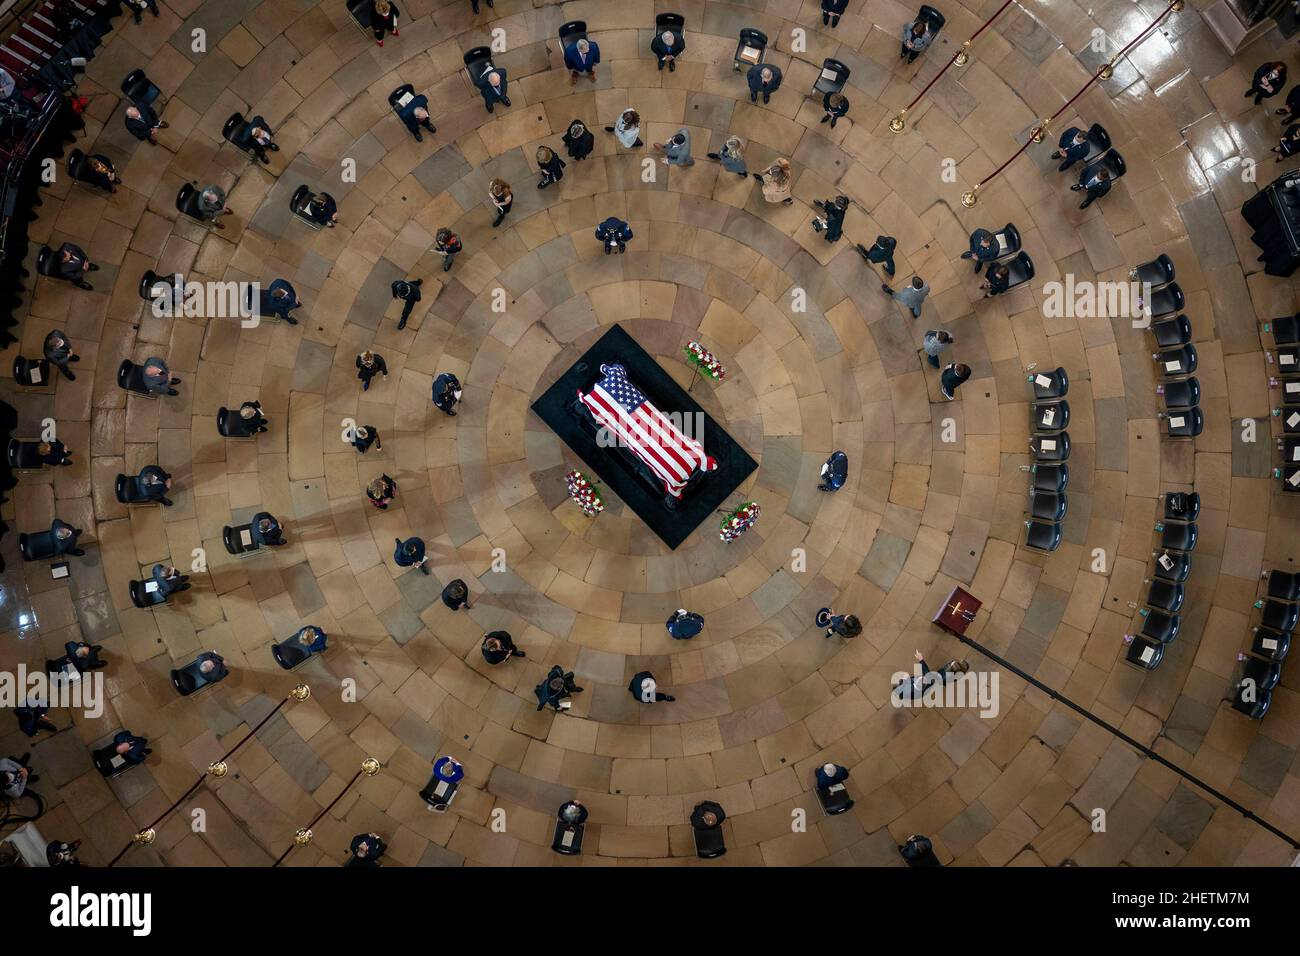 Family of former Sen. Harry Reid, D-Nev., encircles his casket as he lies in state in the Rotunda of the U.S. Capitol, Wednesday, Jan. 12, 2022, in Washington.Credit: Andrew Harnik/Pool via CNP /MediaPunch Stock Photo